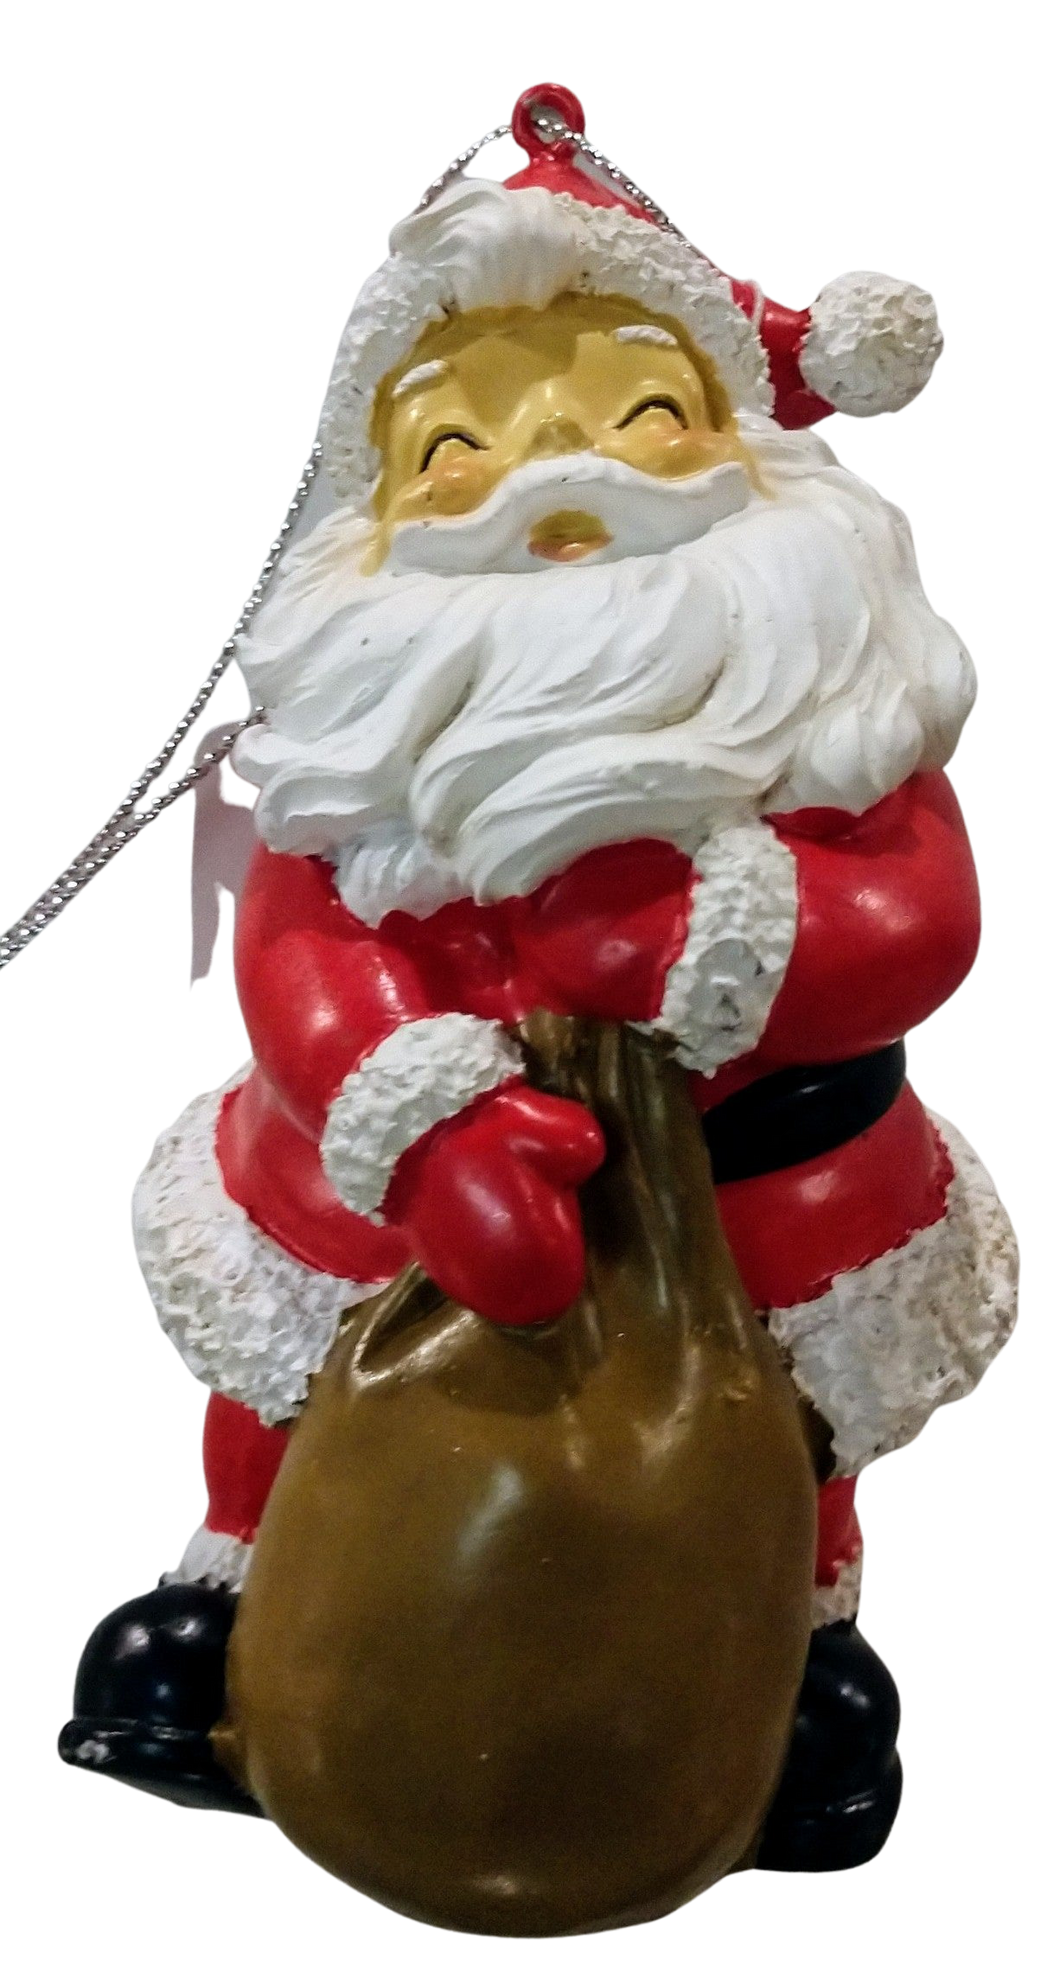 Santa with Sack of Presents Ornament - resin 4.5